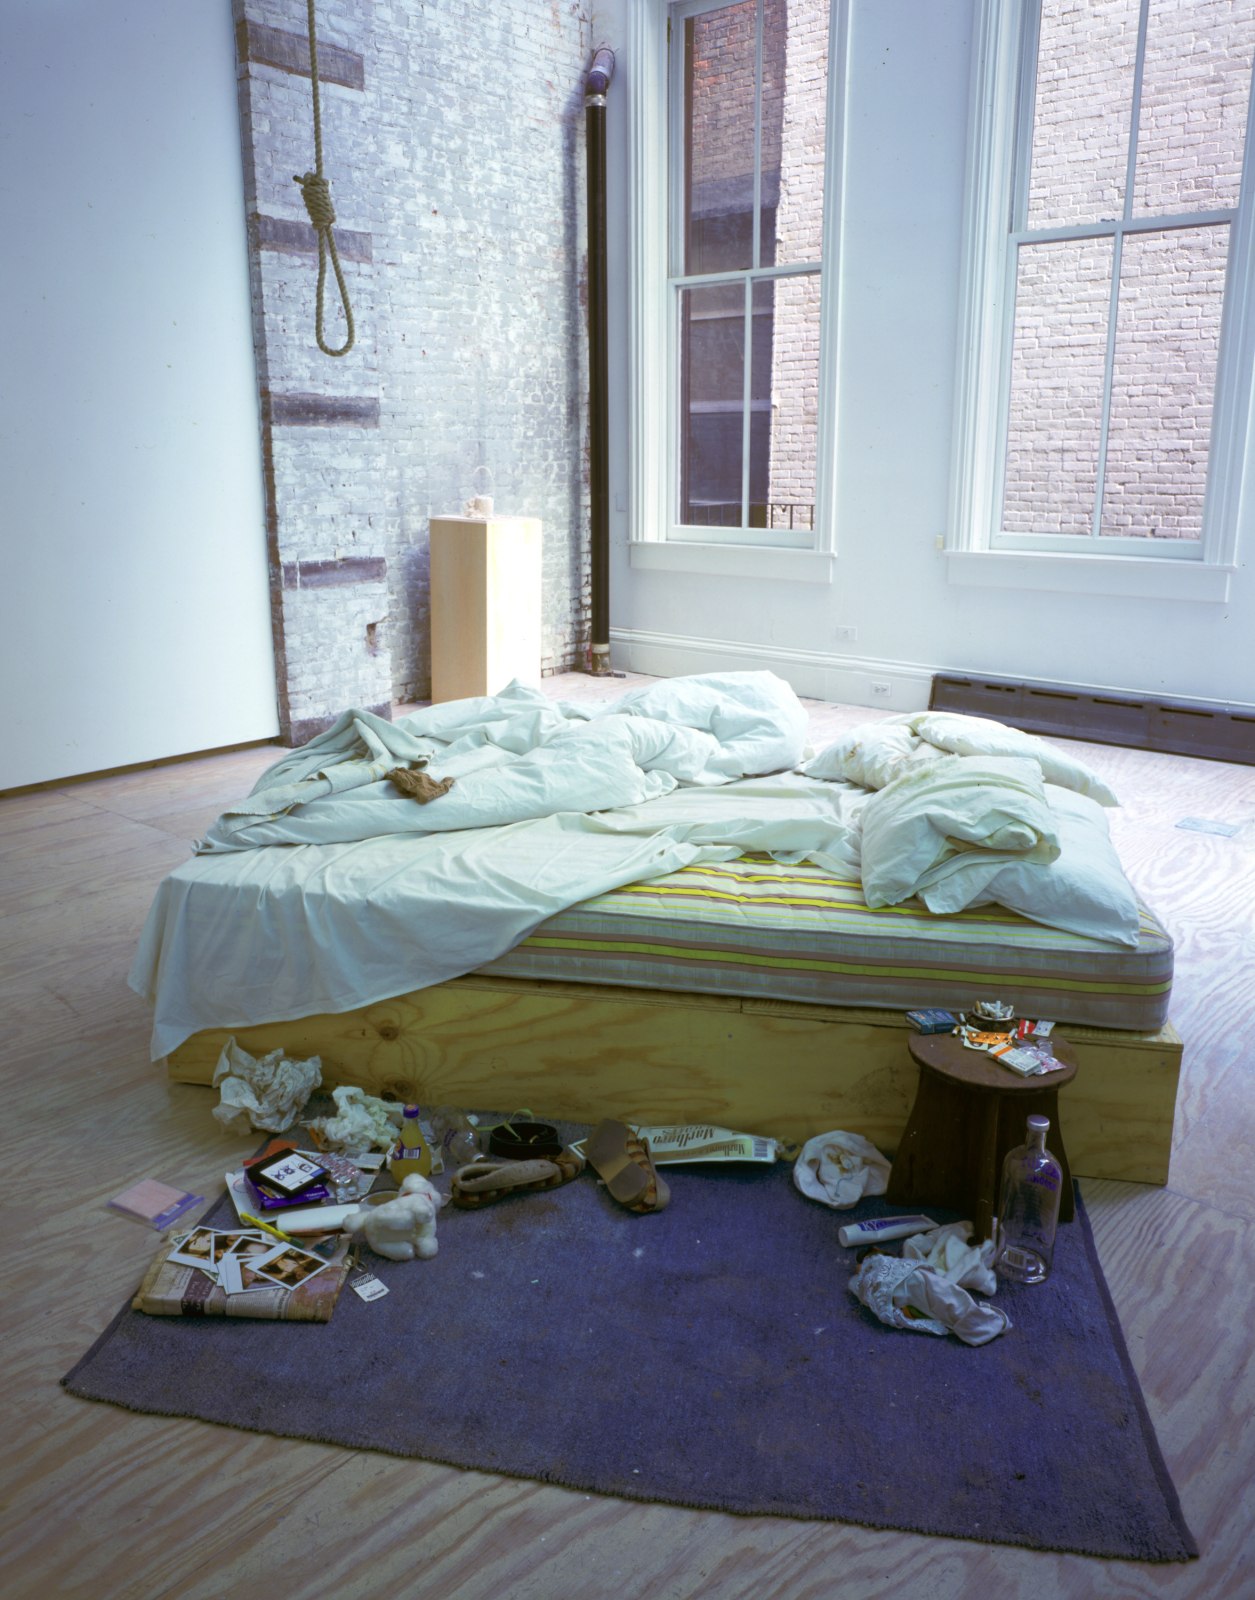 TRACEY EMIN, My Bed, 1998